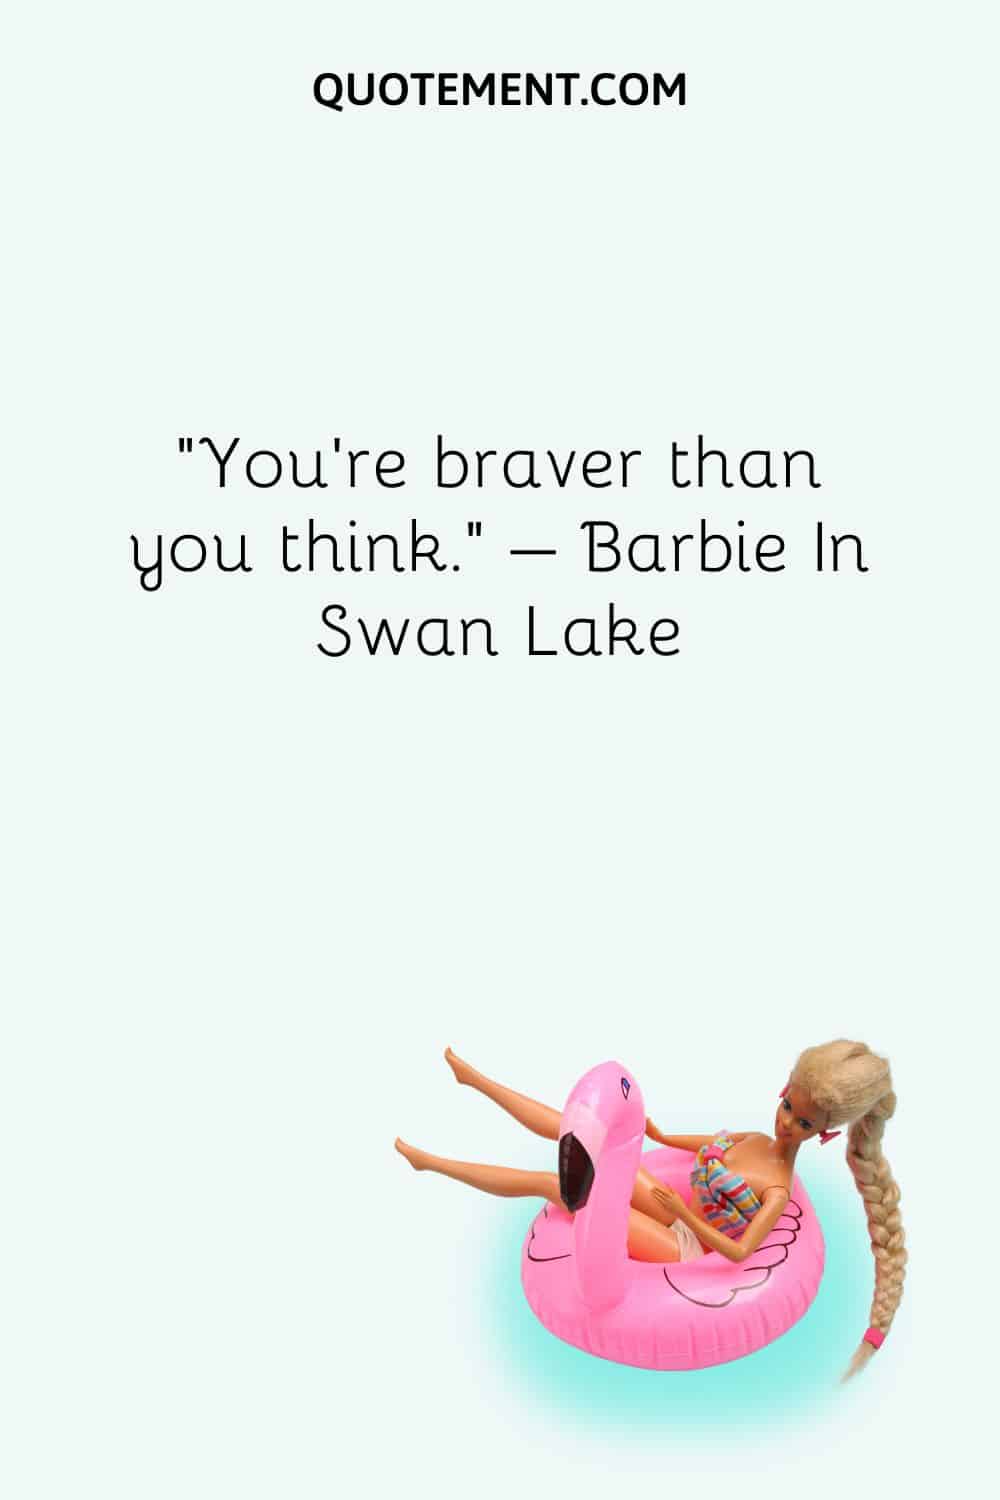 You’re braver than you think.